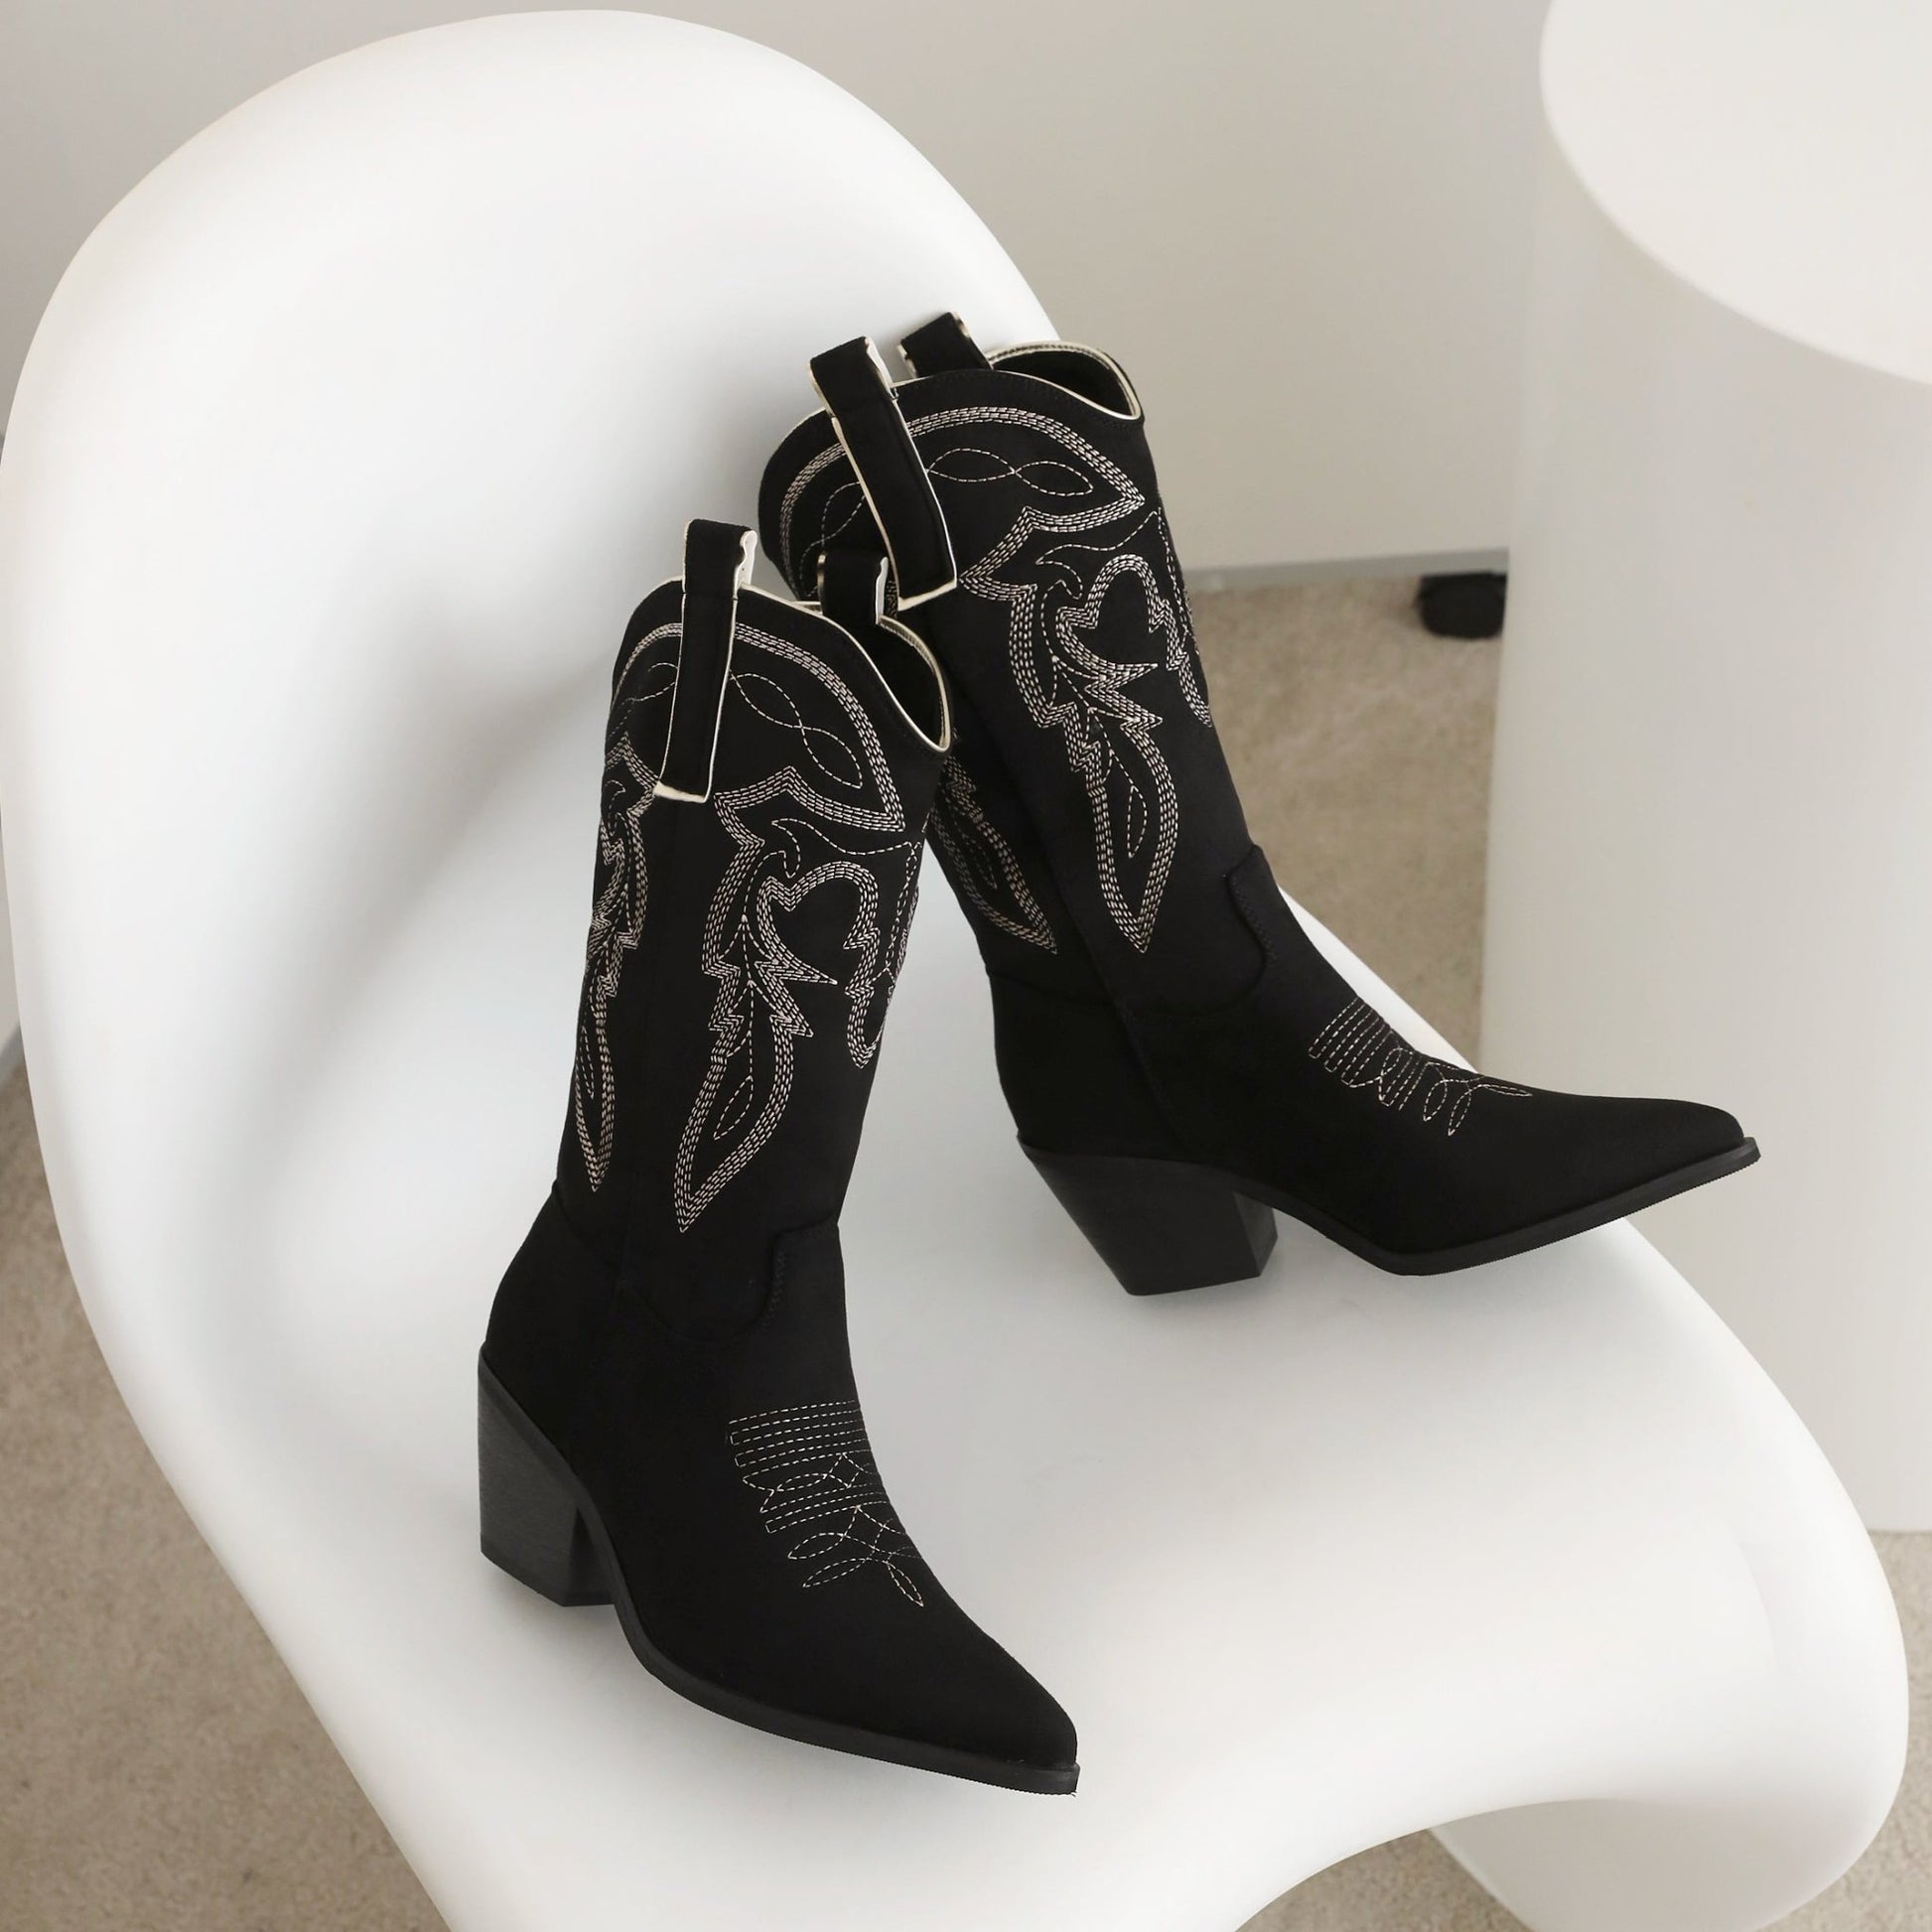 Jenn 68 Pointed Cowboy Mid Calf Boots - Vivianly Shoes - Mid Calf Boots